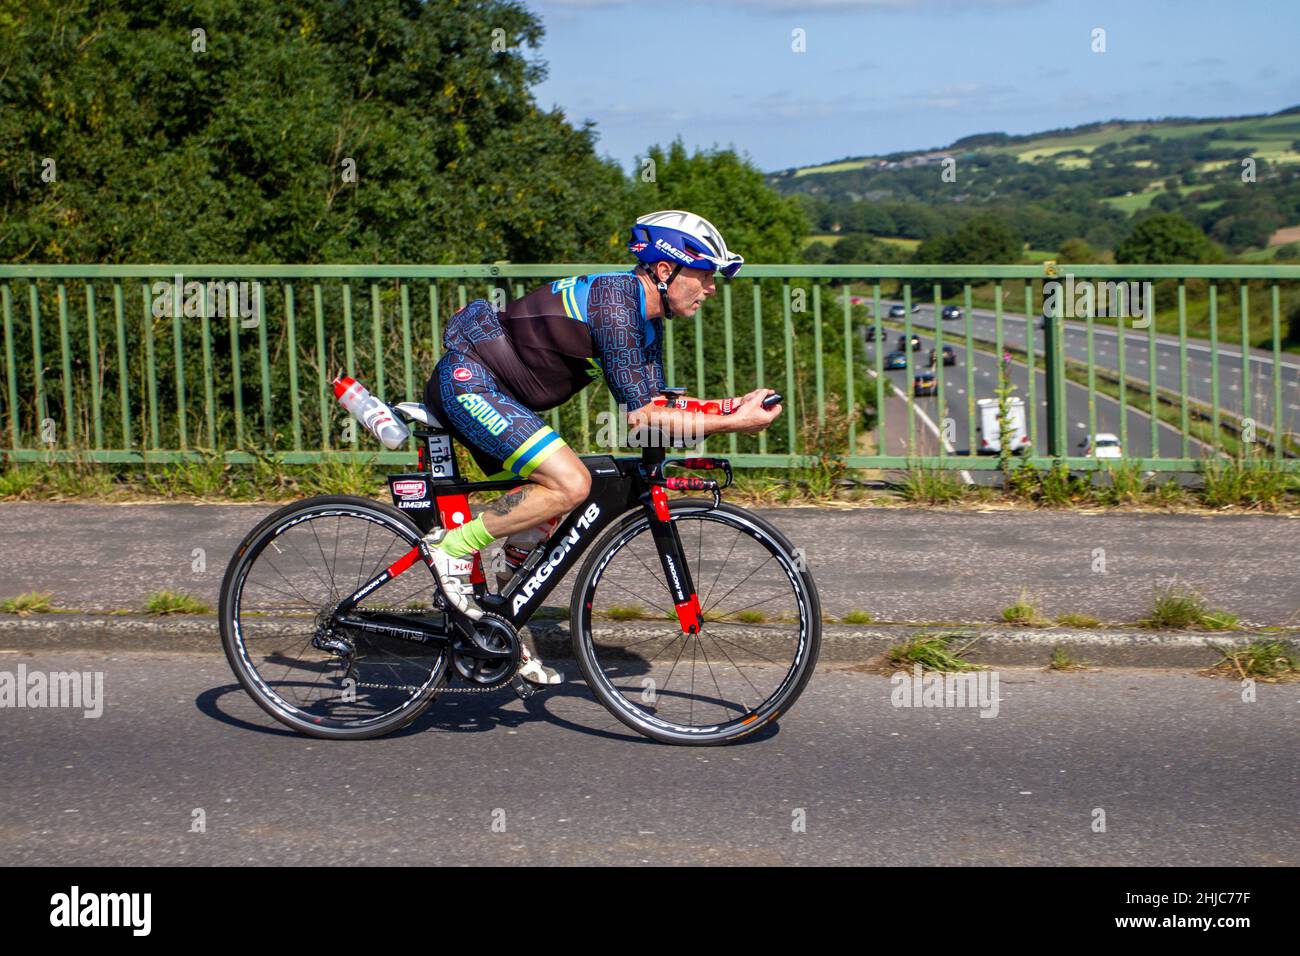 Argon 18 Canadian superior quality road, gravel, triathlon and track bikes; Male cyclist riding sports road bike on countryside route crossing motorway bridge in rural Lancashire, UK Stock Photo